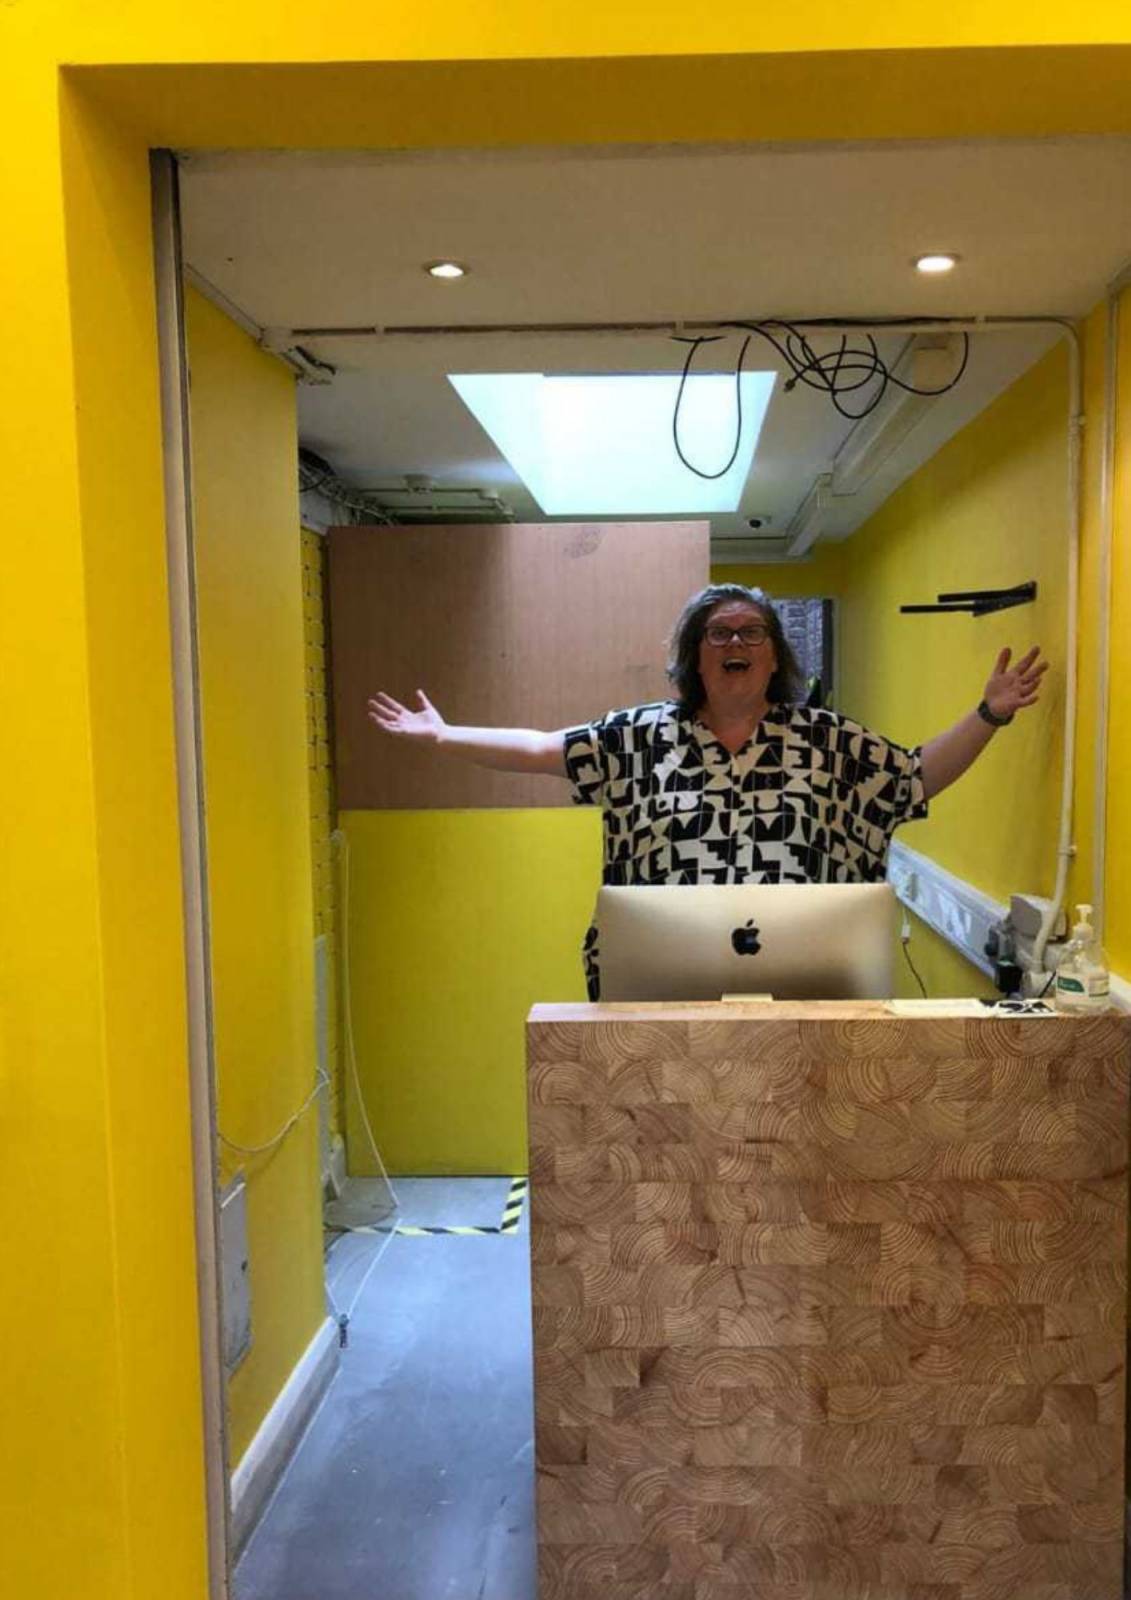 A woman wearing a black and white patterned top raises both arms in a gesture of welcome and excitement, as she stands behind a reception desk at Toynbee Studios. The walls around have been newly painted bright yellow. 